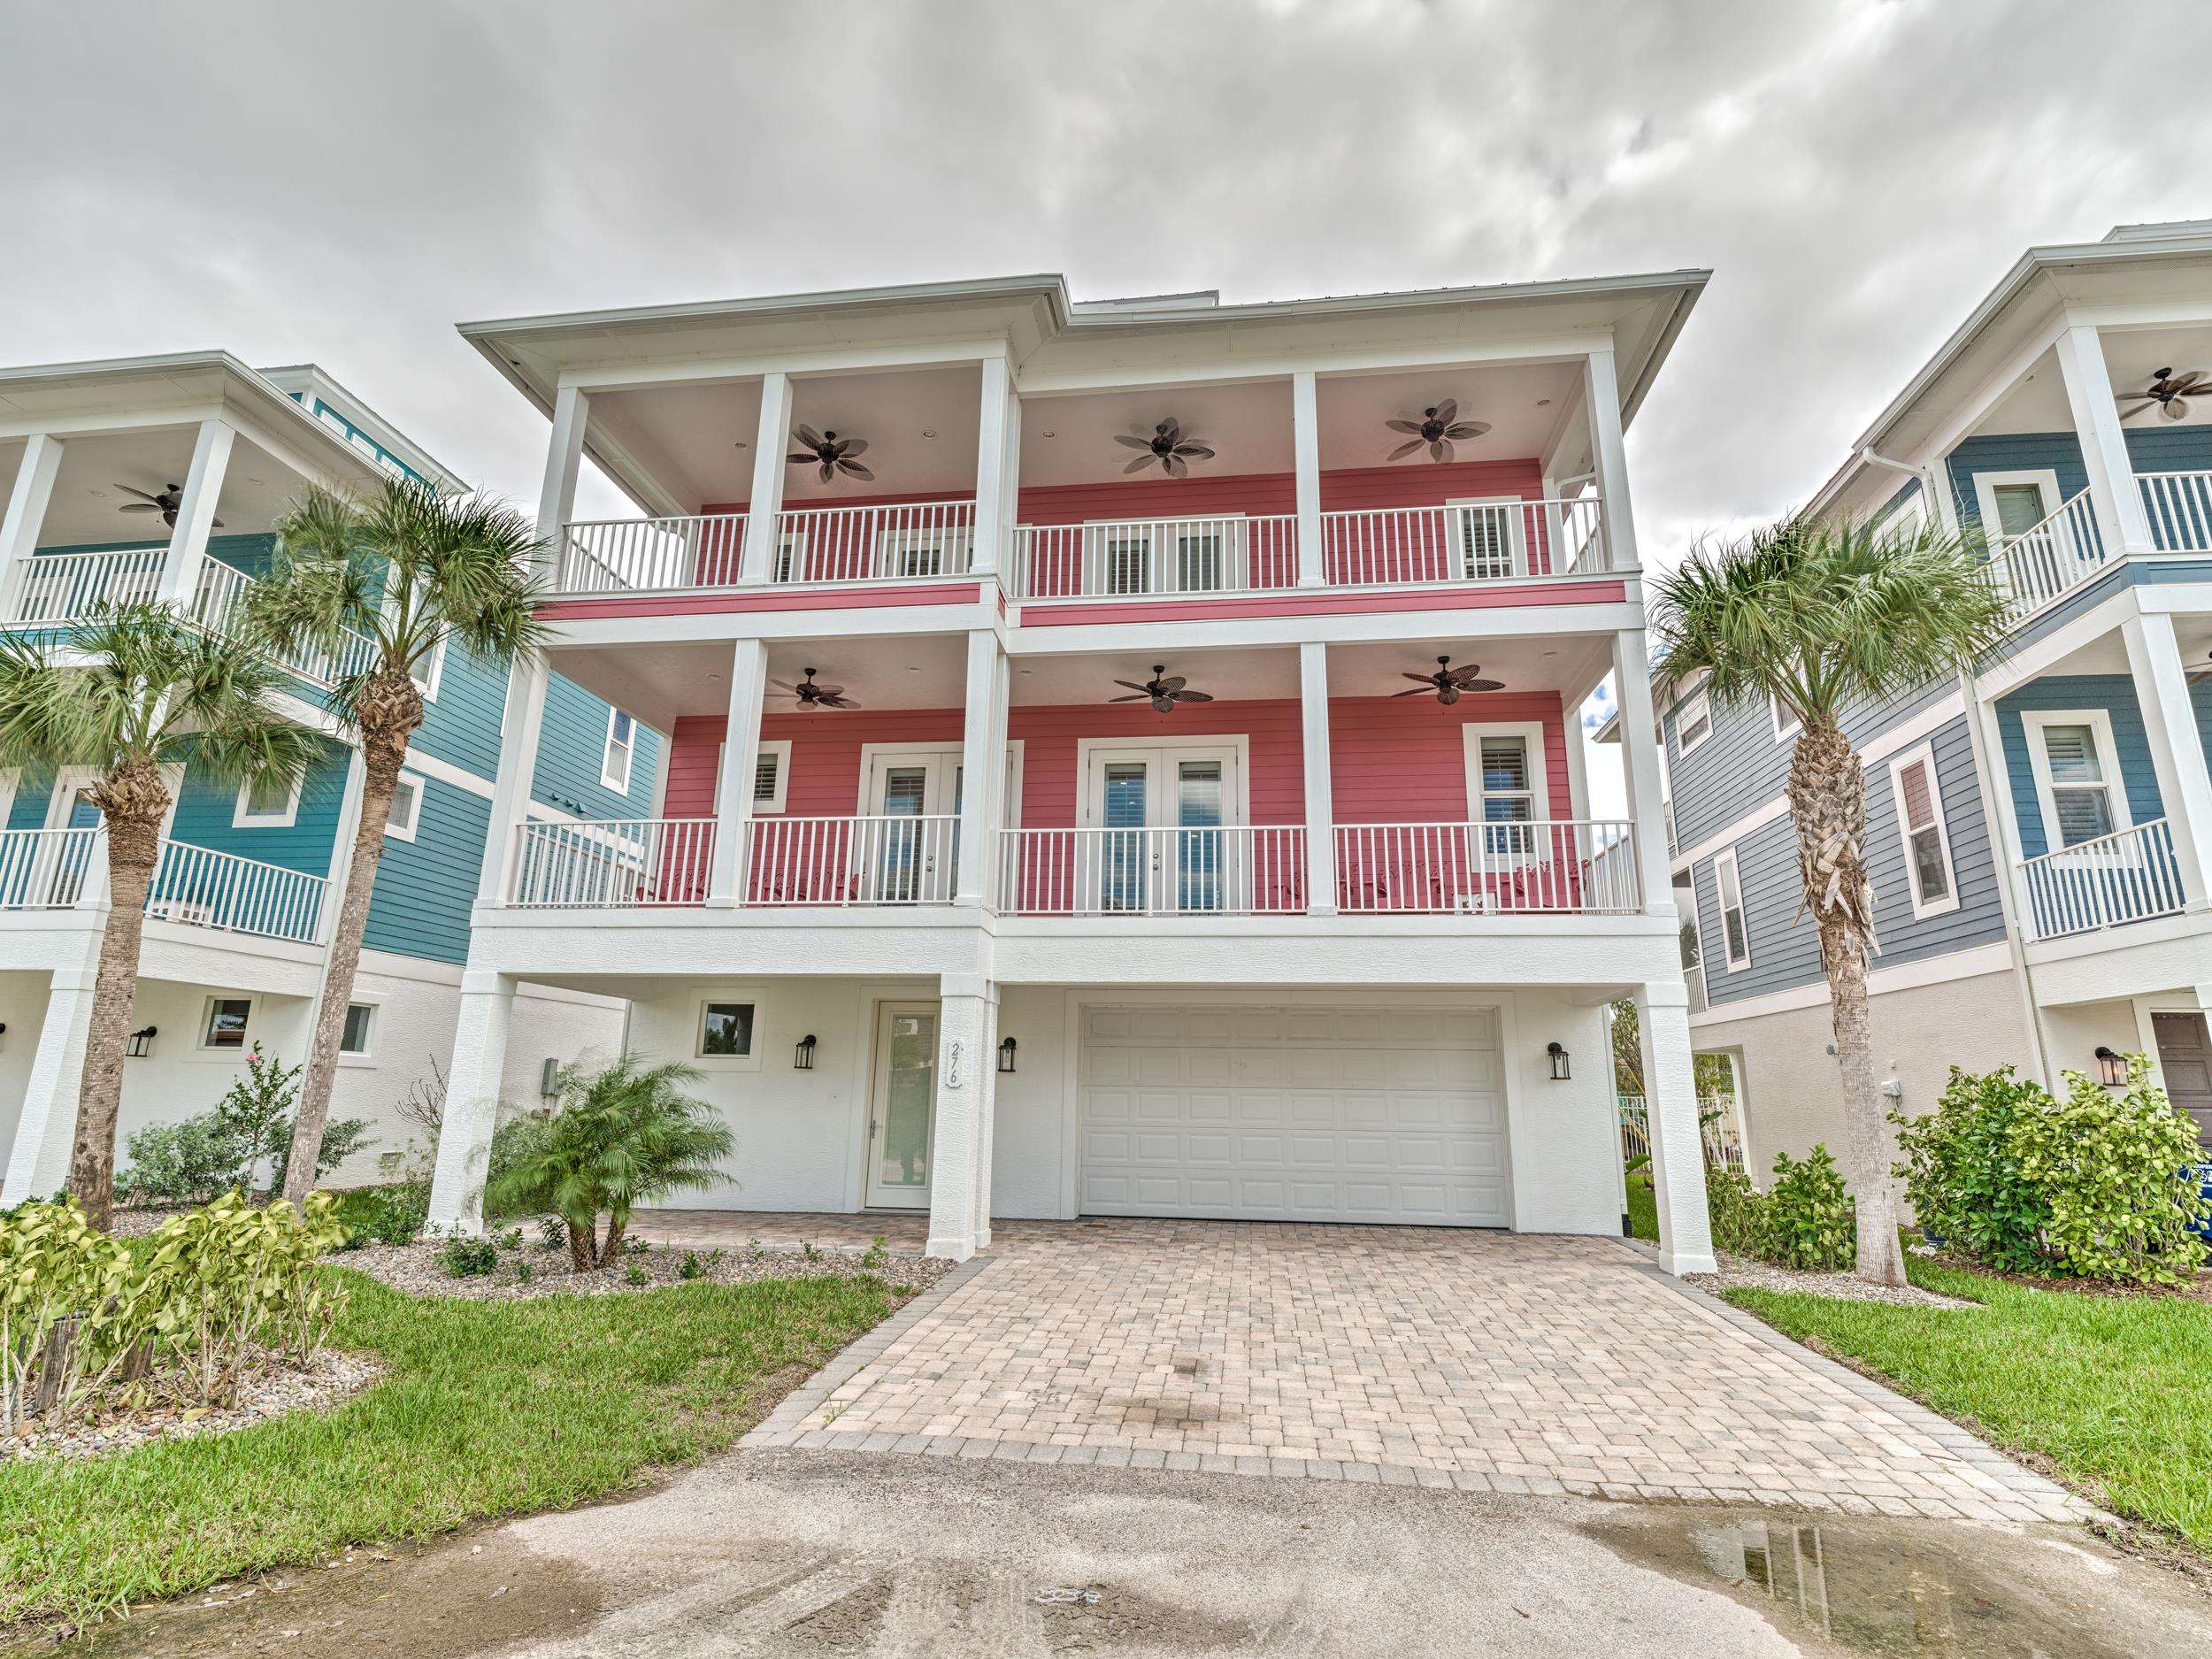 276 Delmar Ave, Fort Myers Beach, Florida 33931, 3 Bedrooms Bedrooms, ,2 BathroomsBathrooms,Condo,For Sale,Delmar Ave,2231041